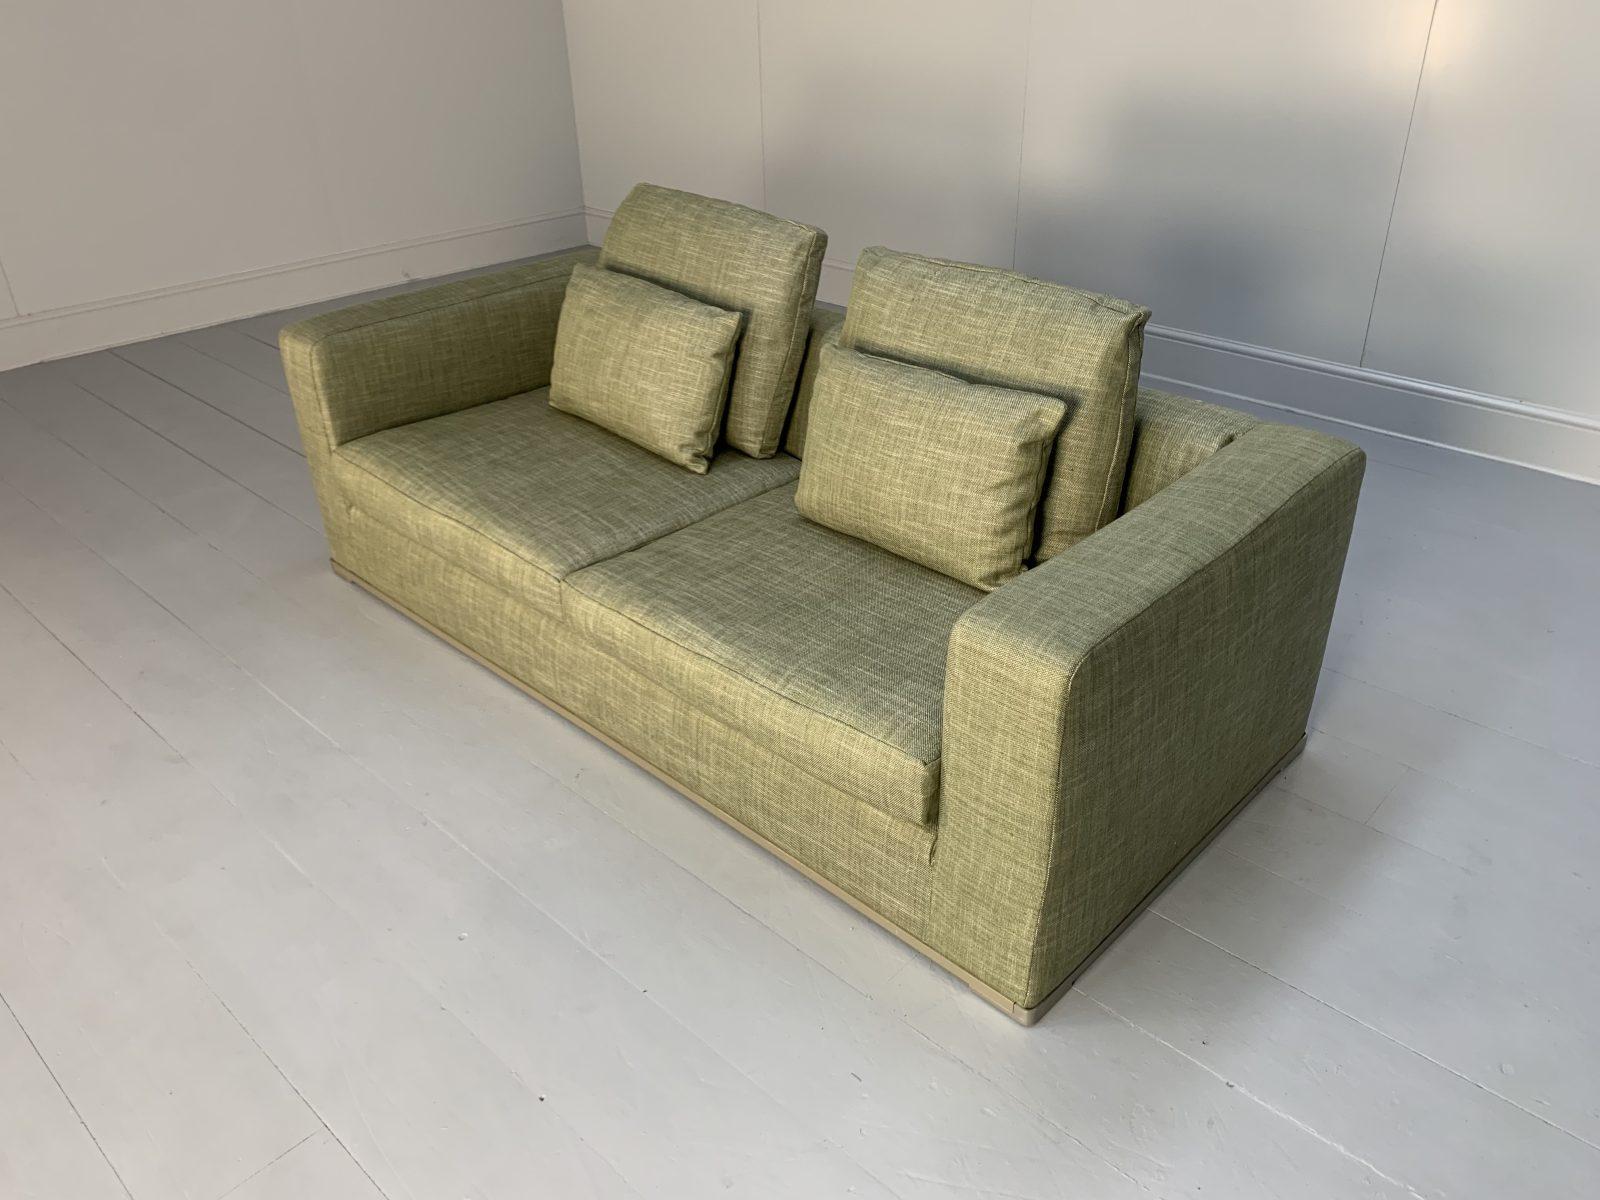 Pair of B&B Italia “Omnia” Sofas, 2.5-Seat, in Pale Green Linen For Sale 10